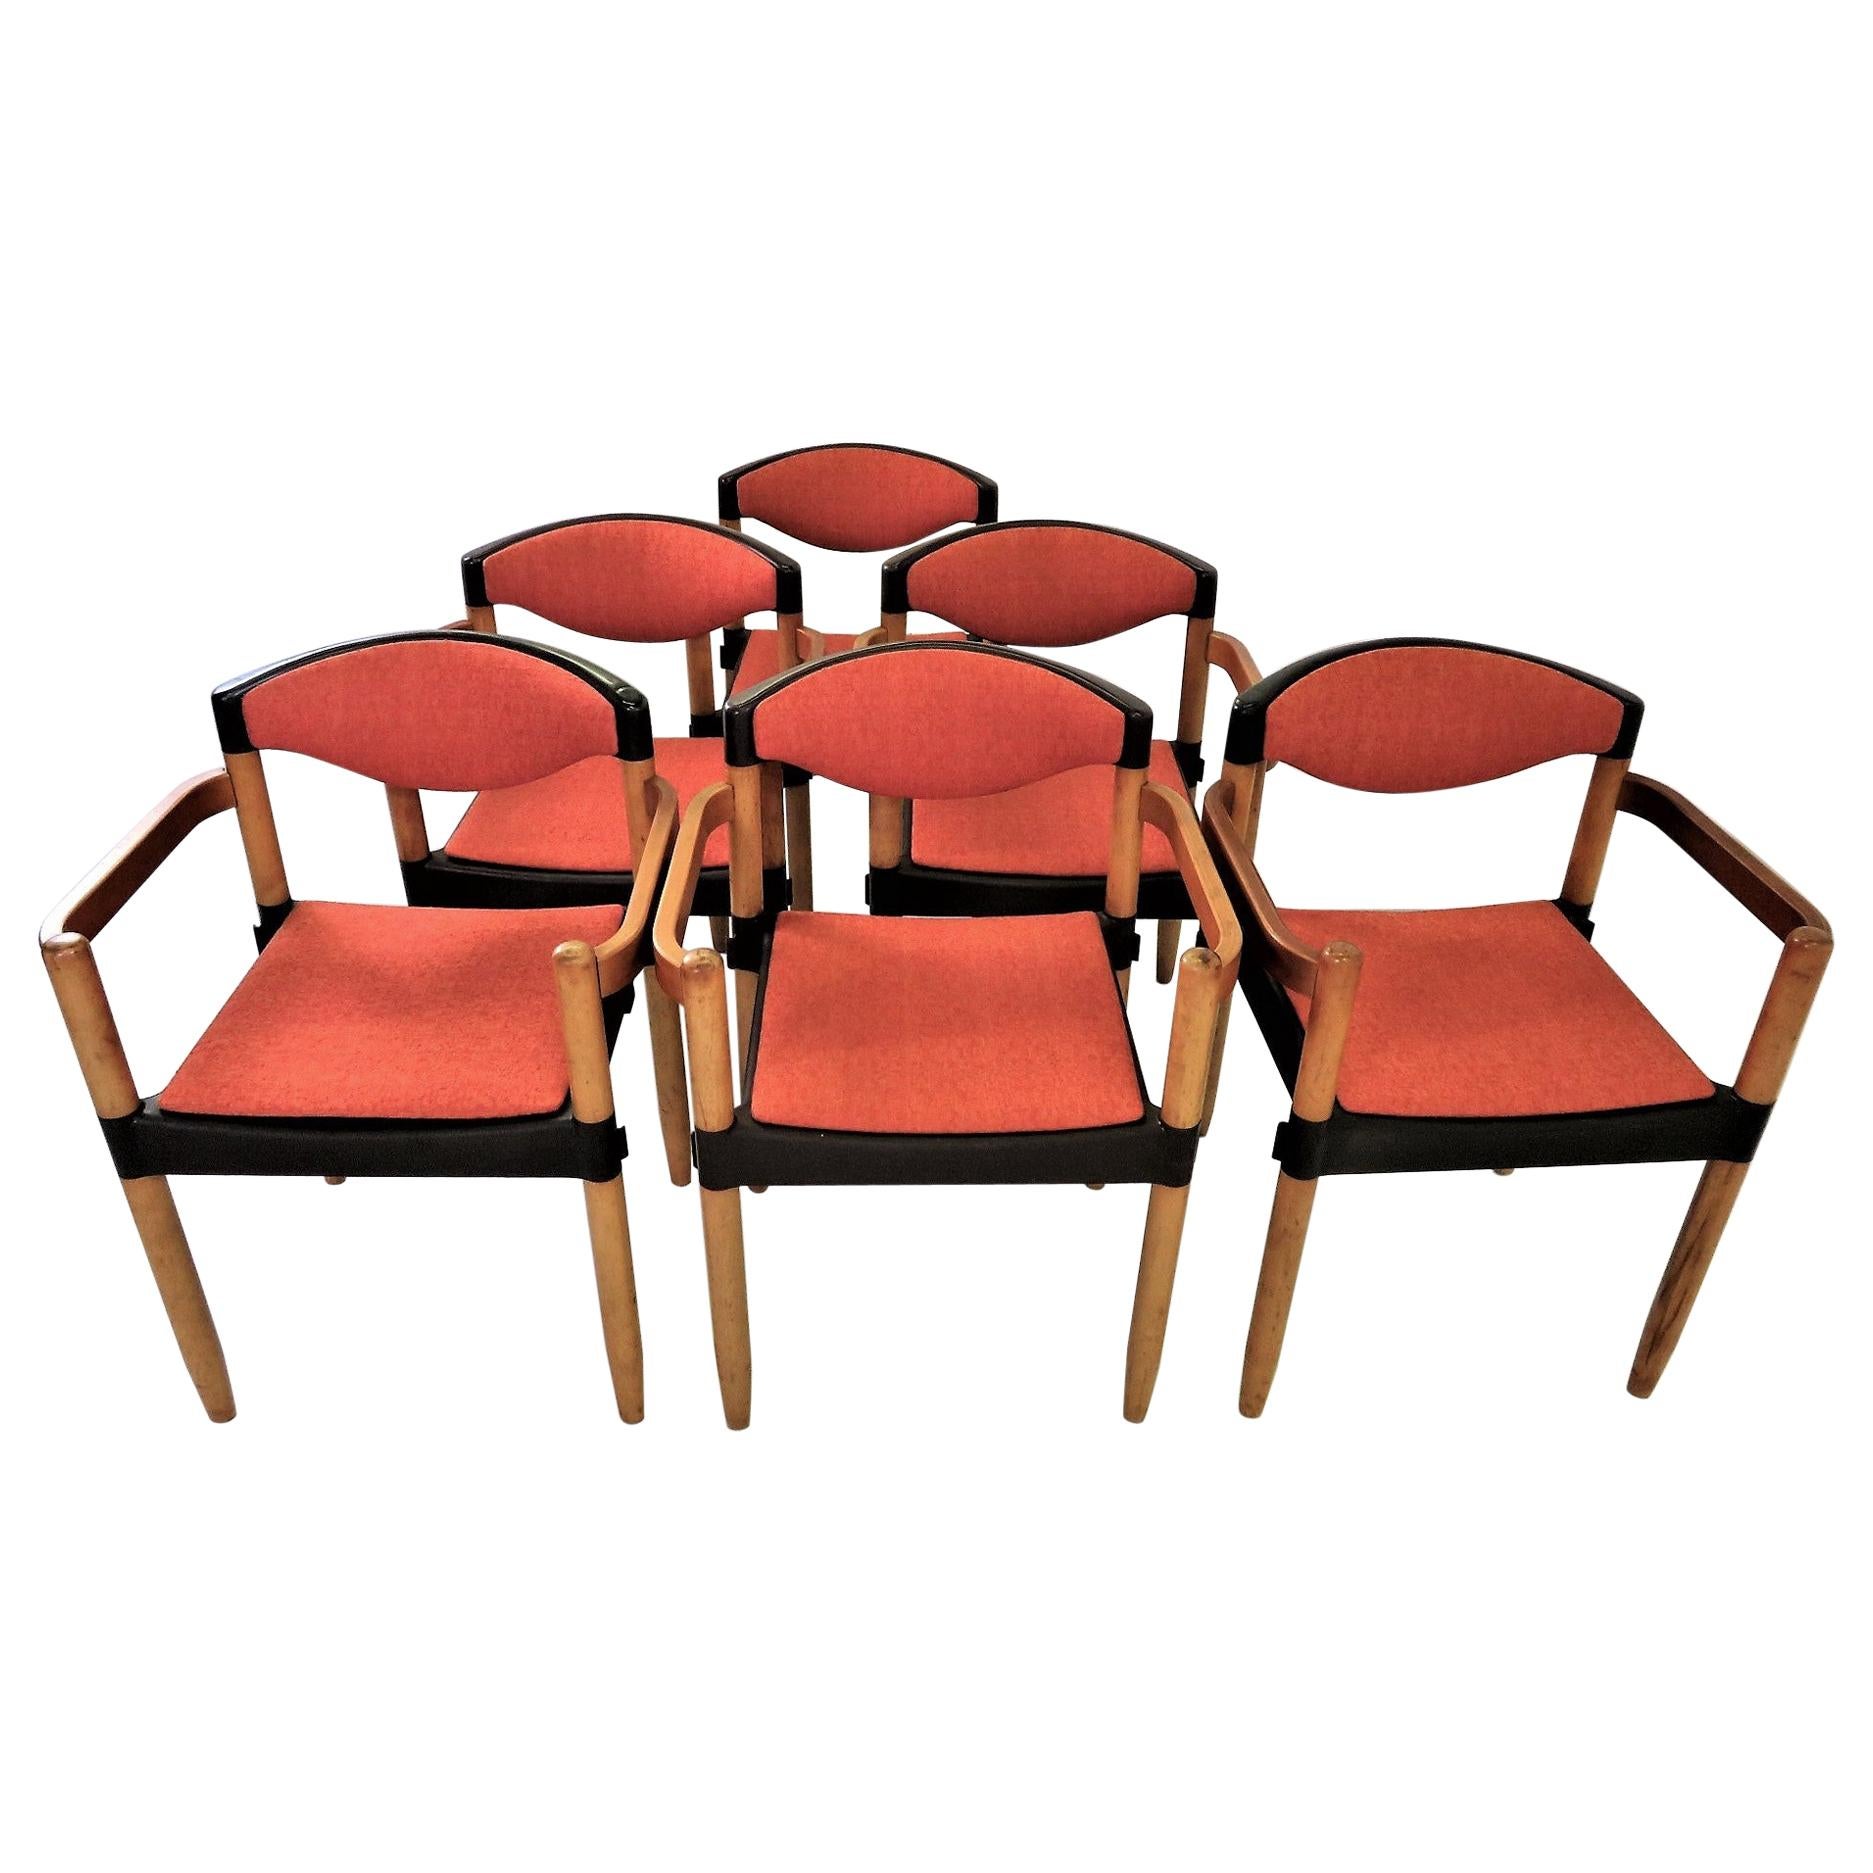 6 Strax Dining Chairs by Casala / Germany 1970s by Harmut Lohmeyer